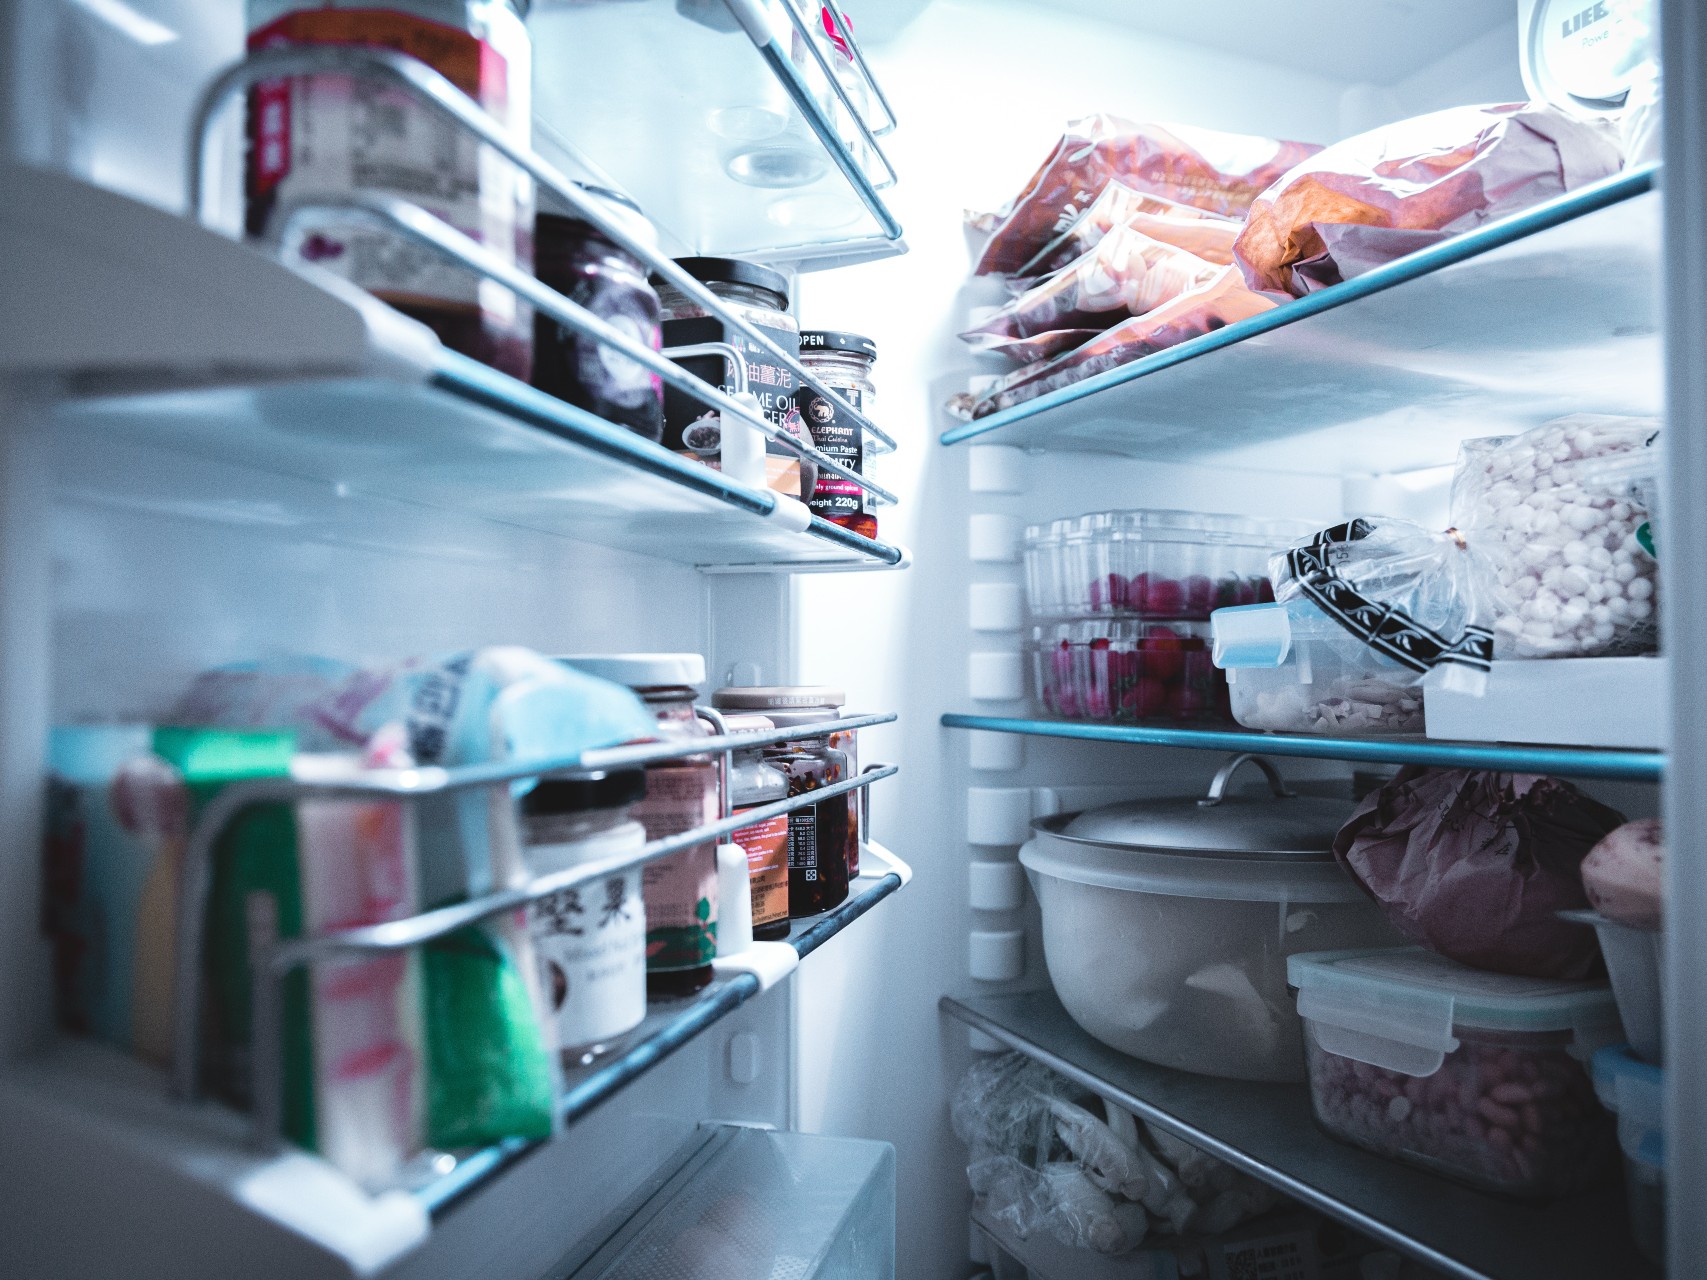 The EPA is cracking down on more of the greenhouse gases in your fridge